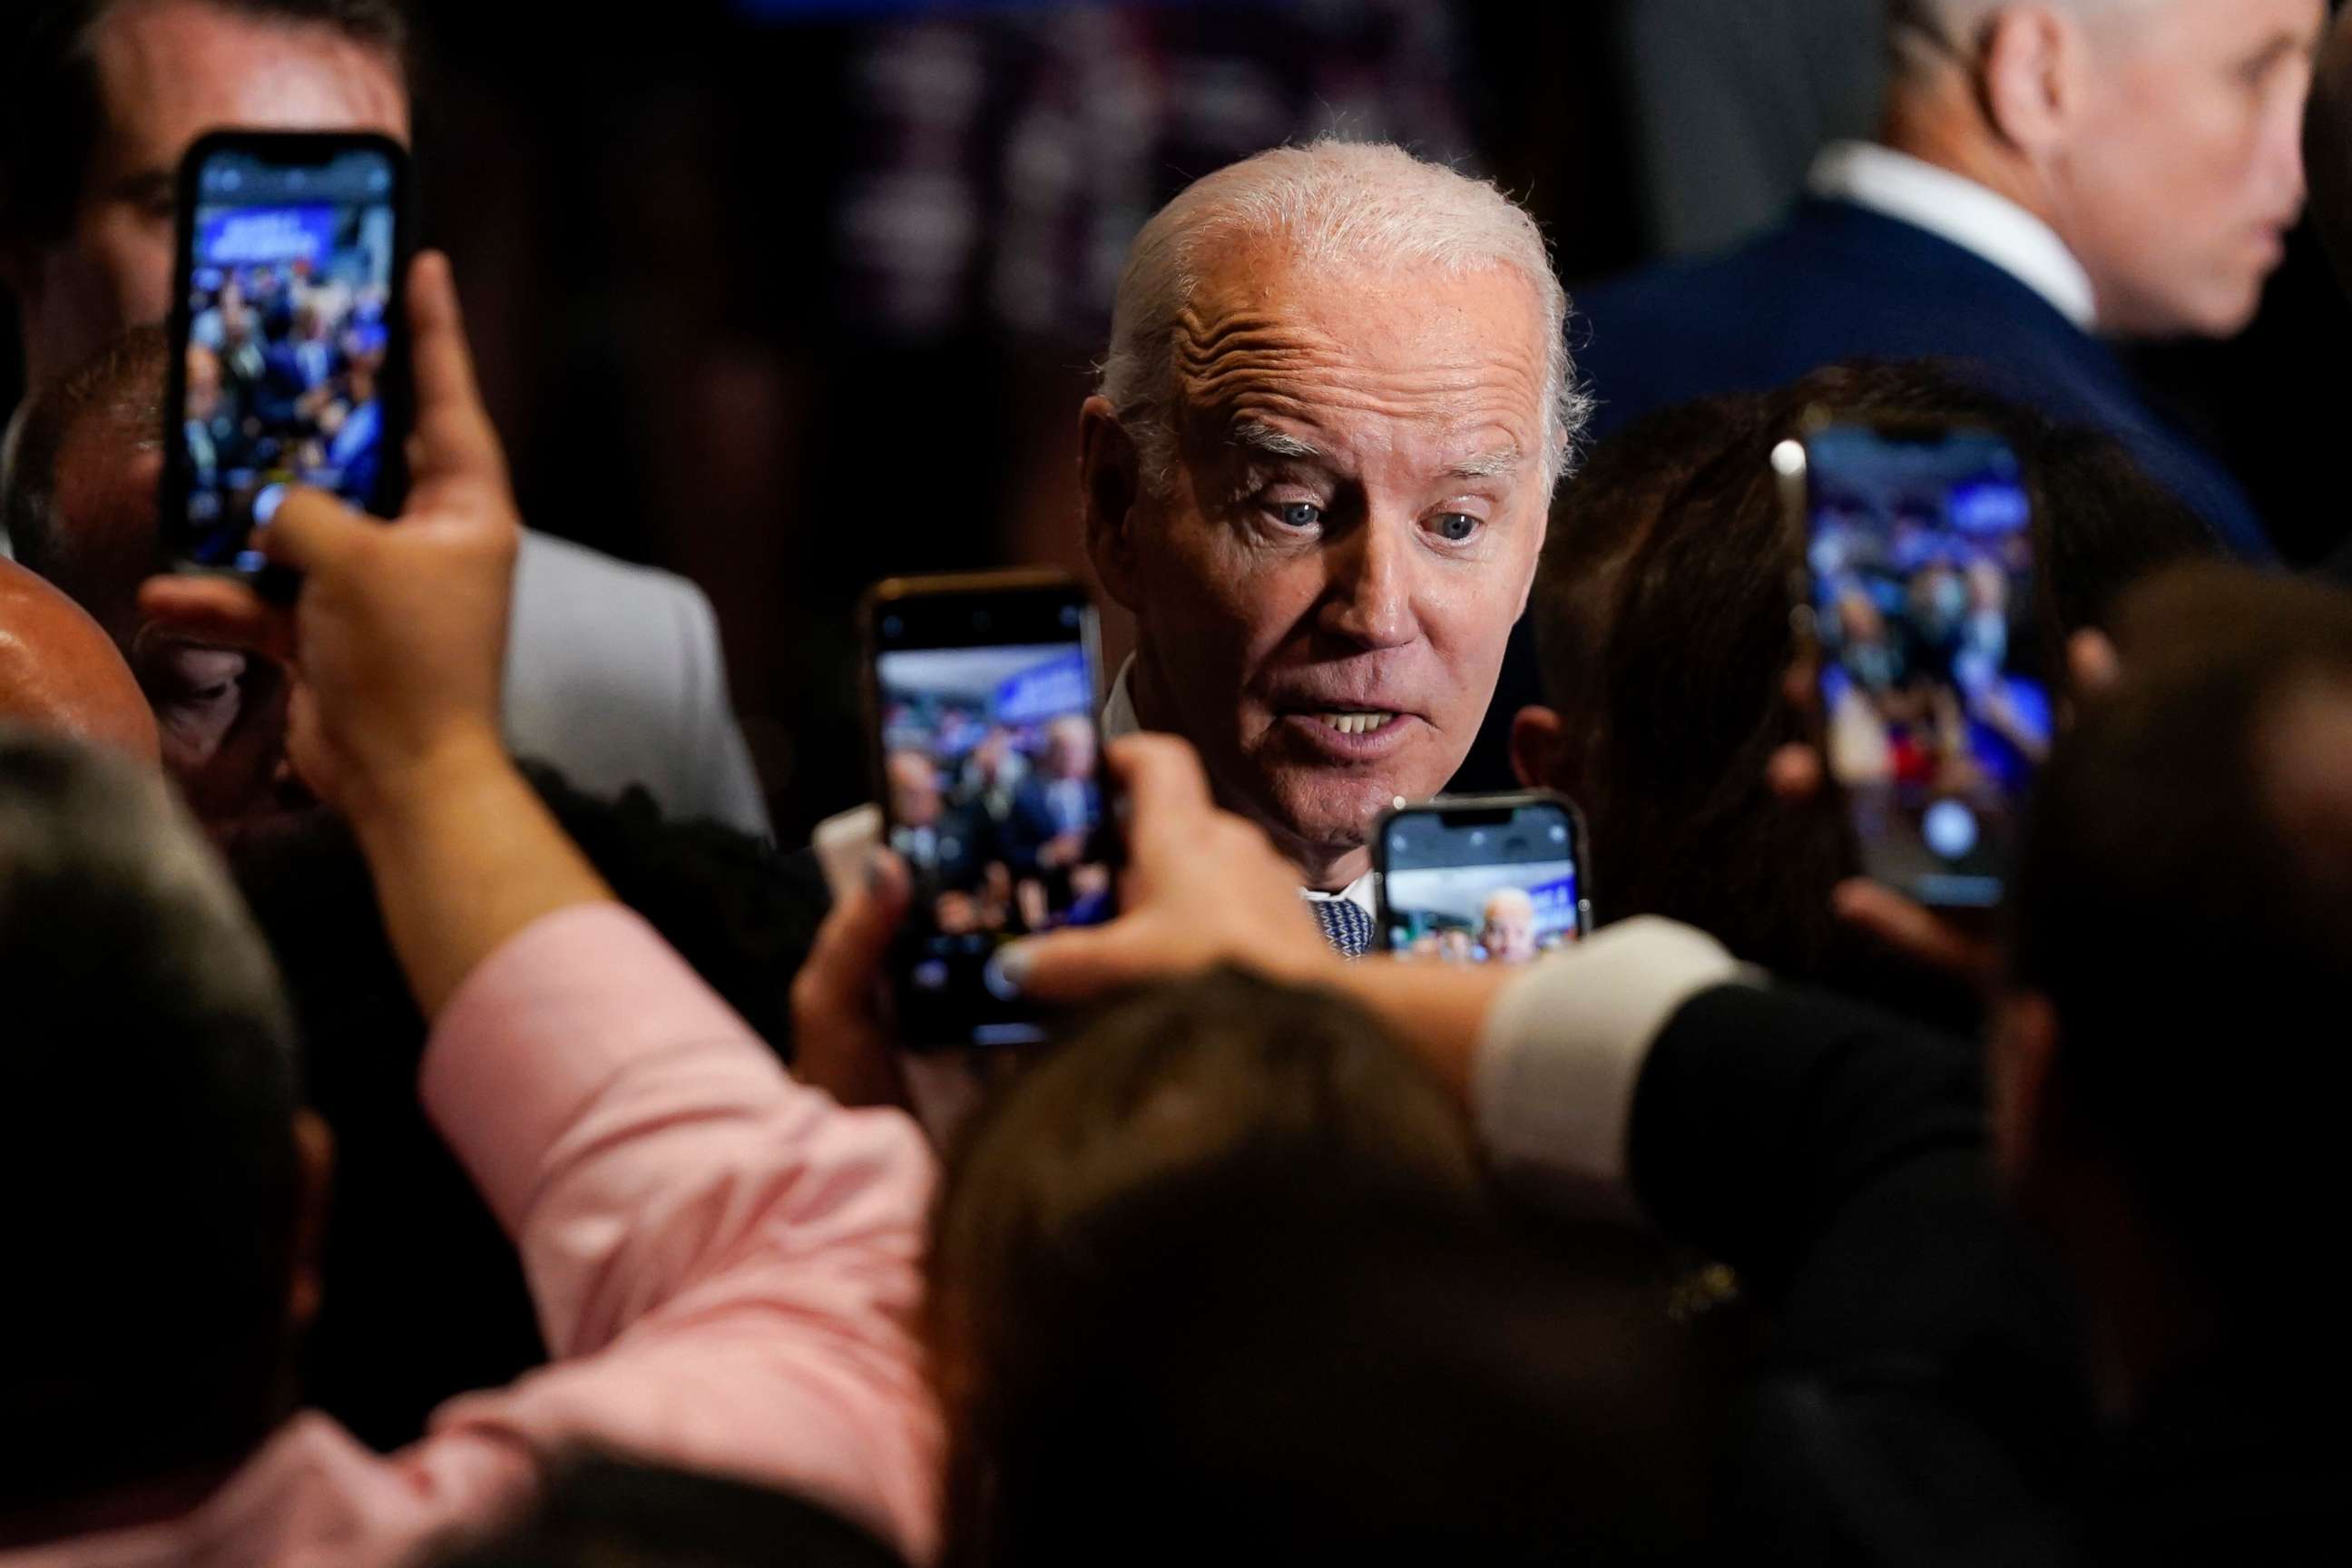 PHOTO: President Joe Biden greets people after speaking during a Democratic National Committee event at the National Education Association Headquarters, Sept. 23, 2022, in Washington.